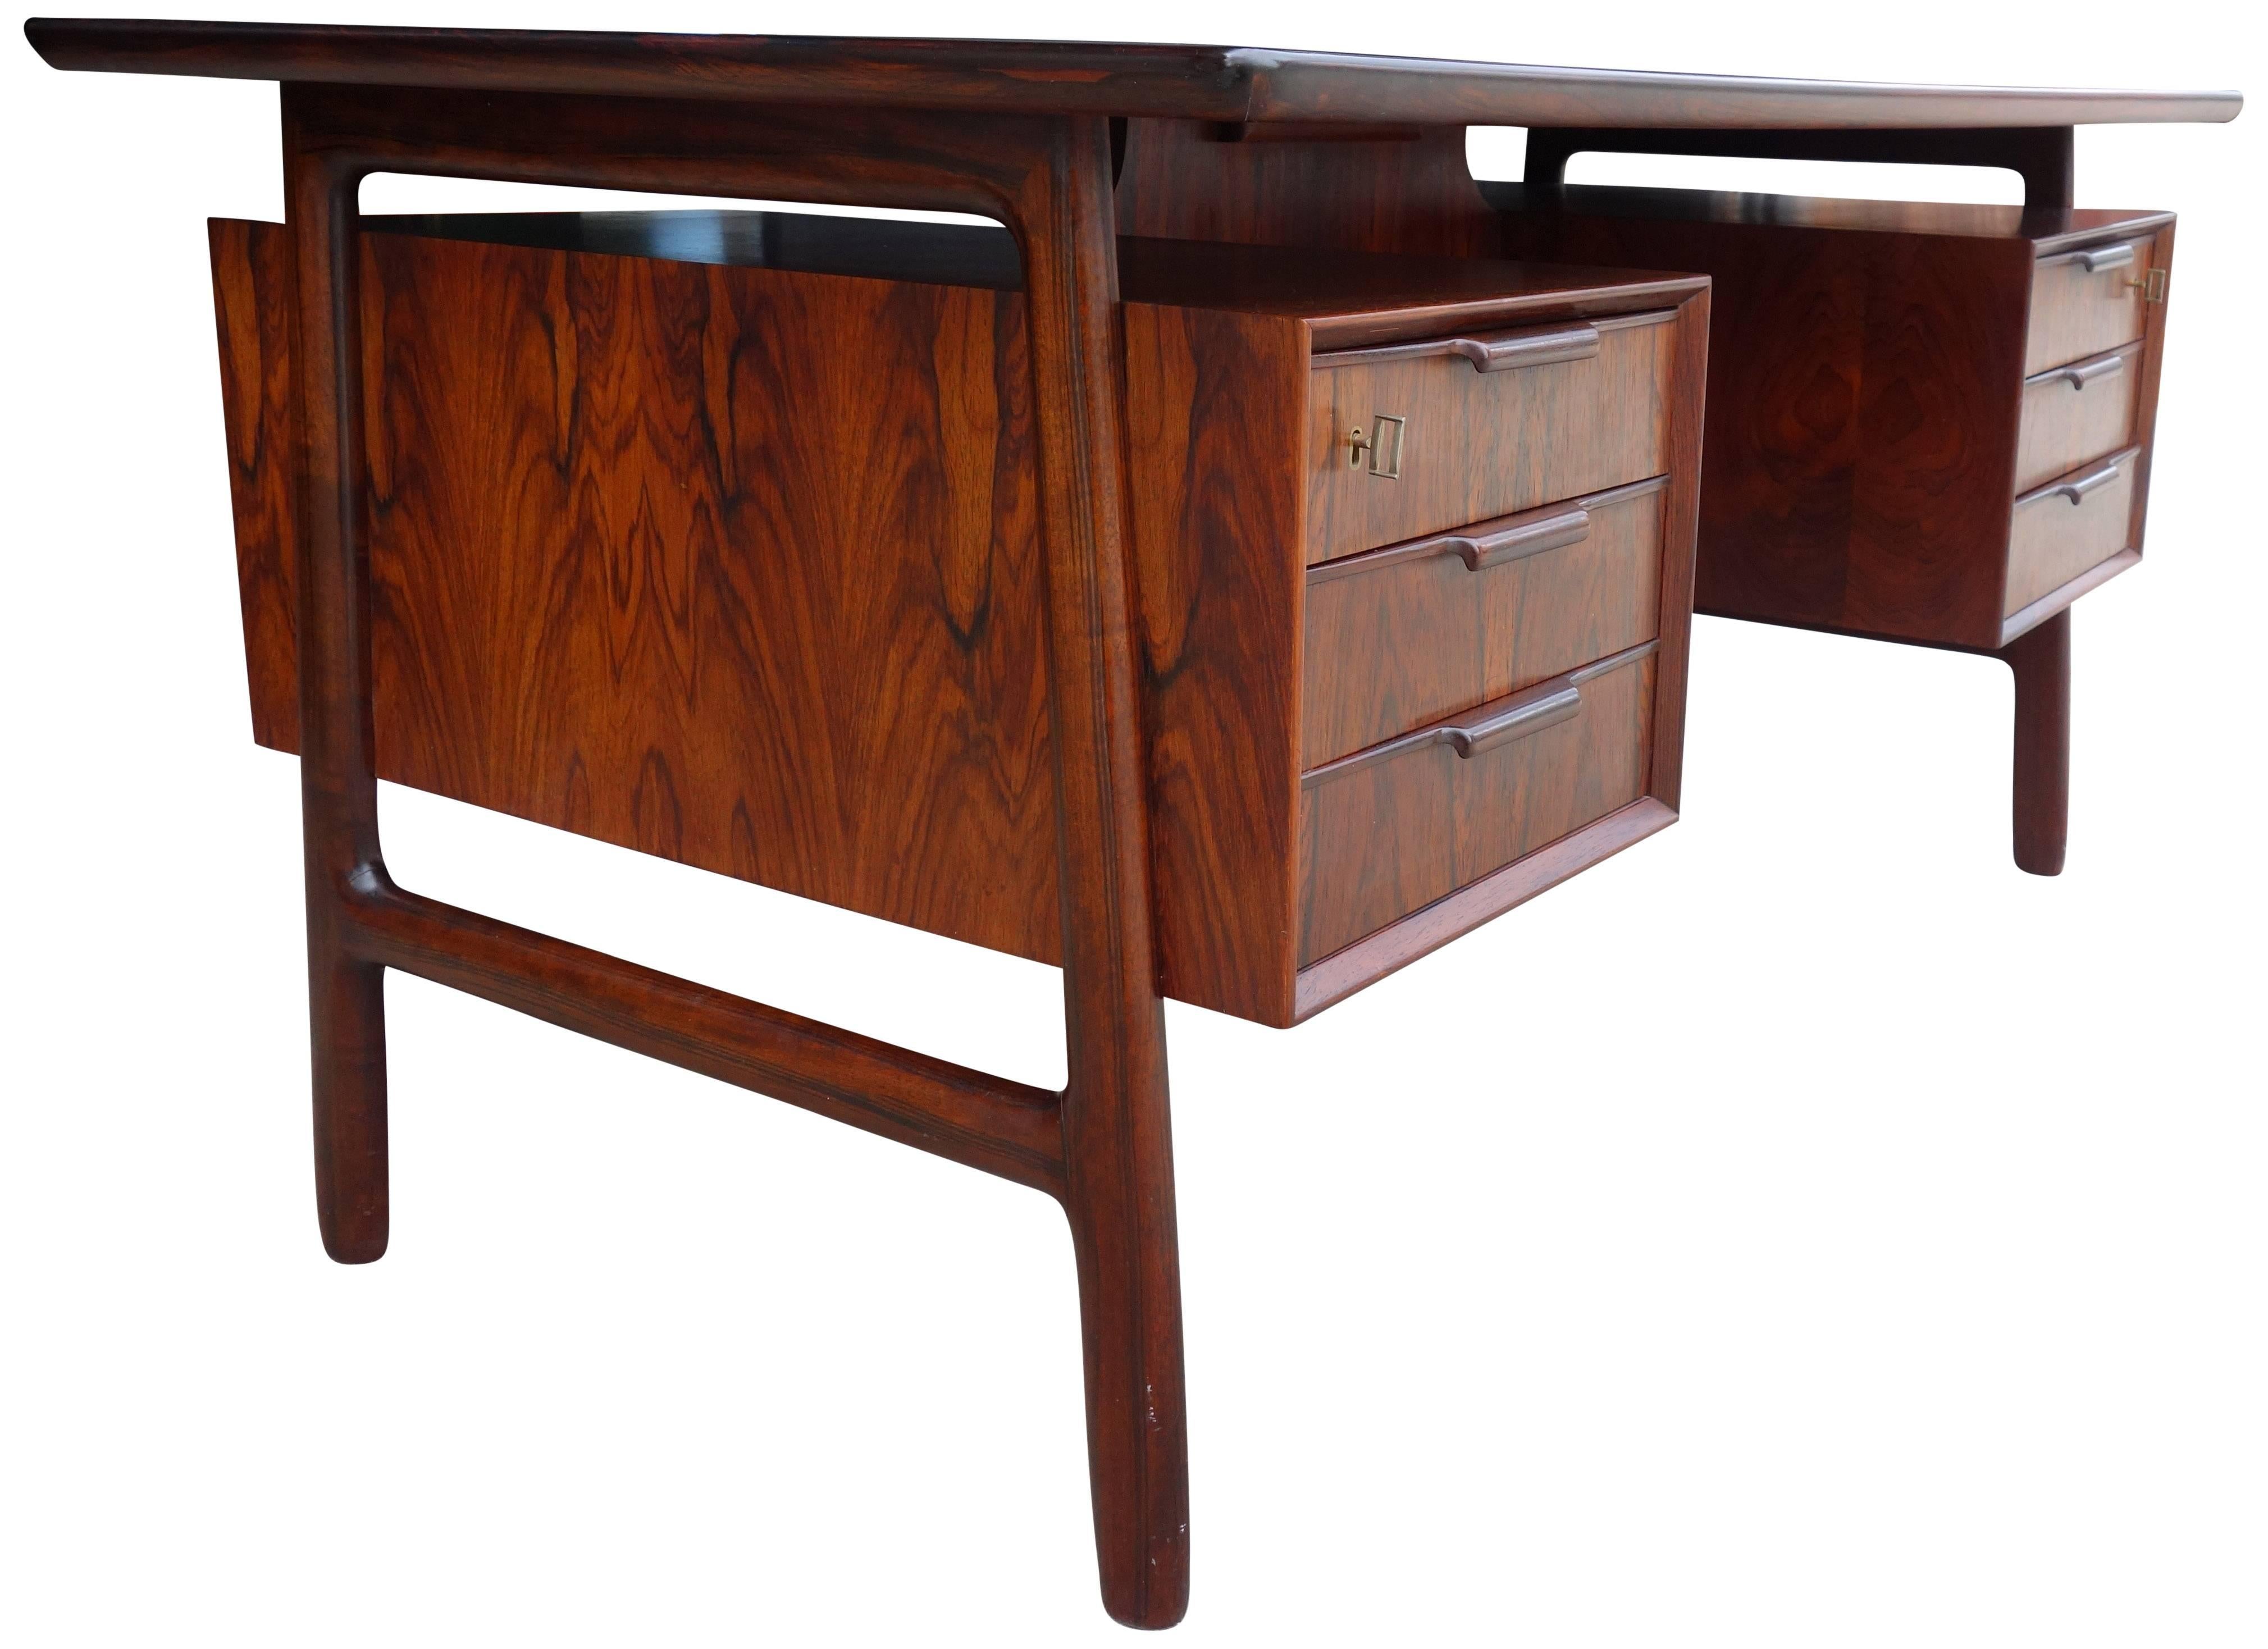 Mid-Century rosewood desk by Gunni Omann for Omann Jun.
Beautiful highly figured rosewood executive desk model 75. Front has two locking drawers and the back has a fold down cabinet with two open cabinets to store books.